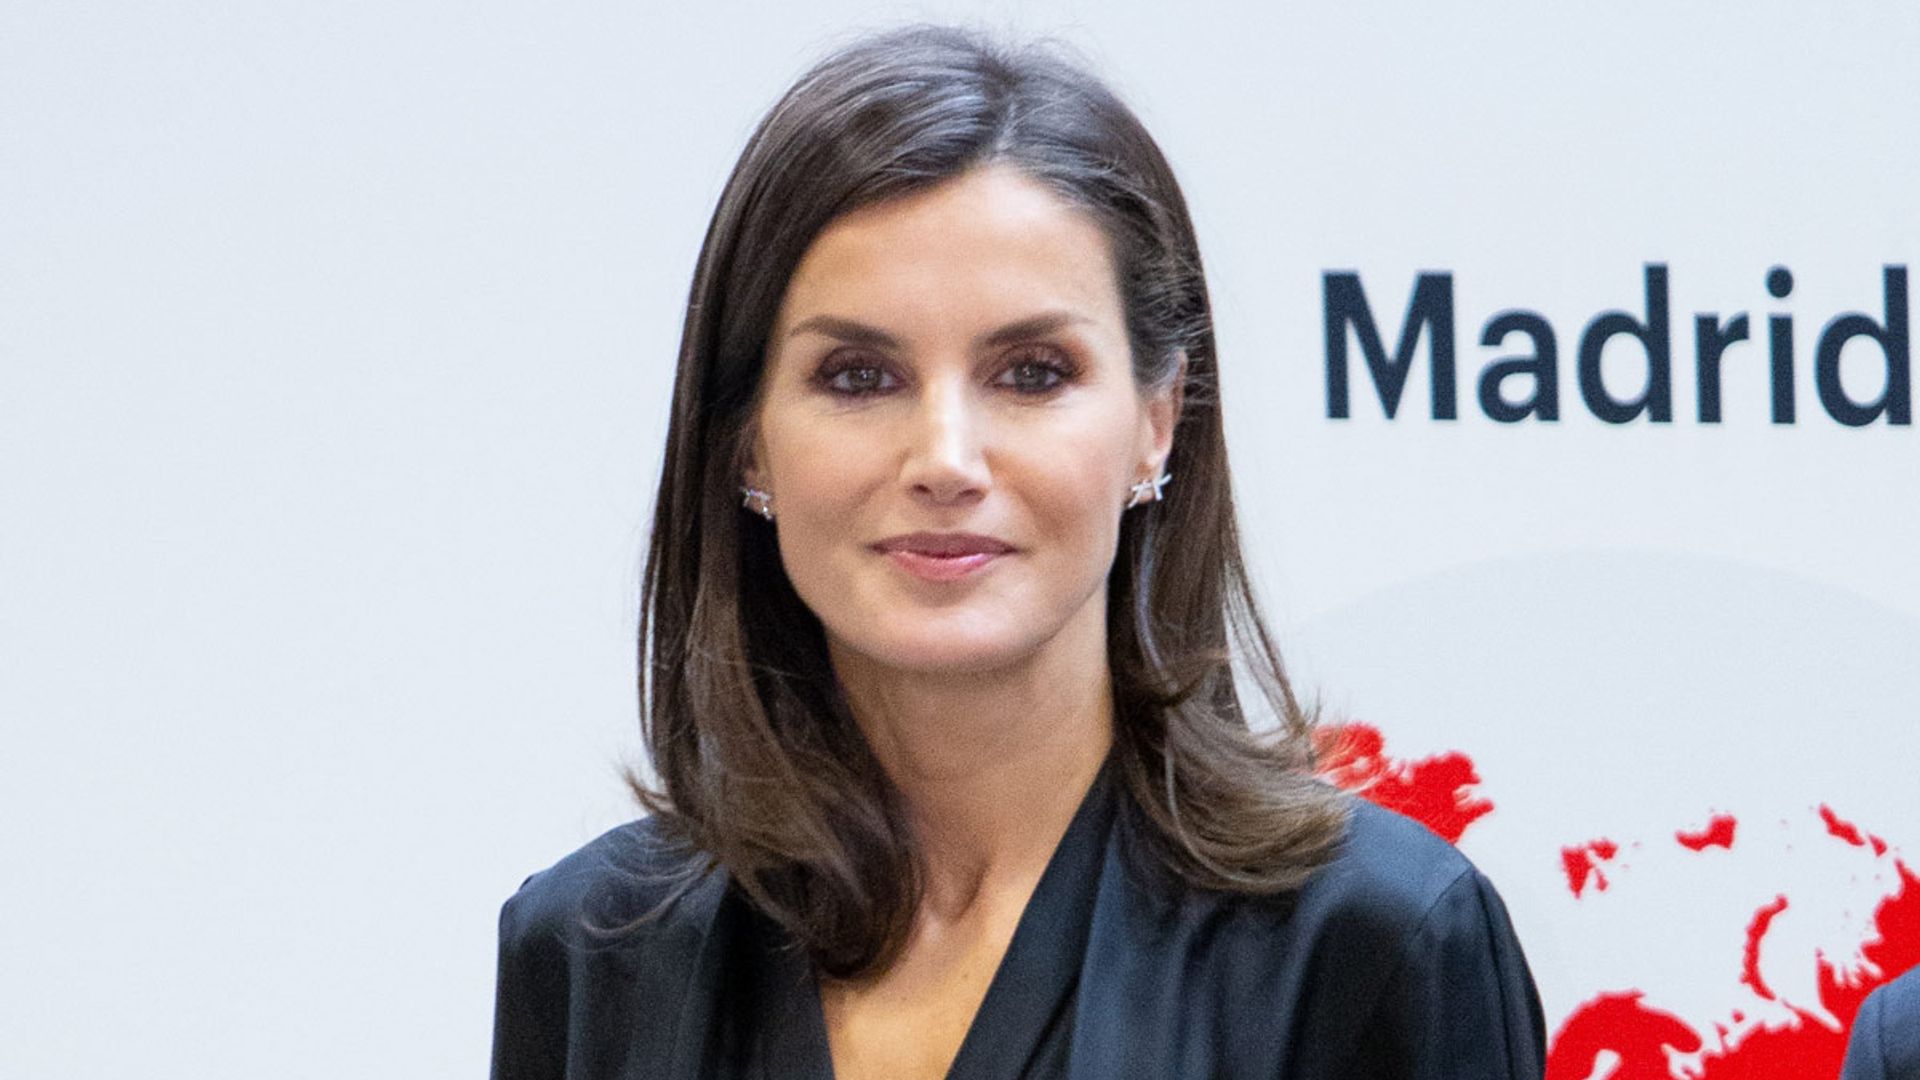 Queen Letizia just wore the PERFECT work outfit for an engagement in Madrid